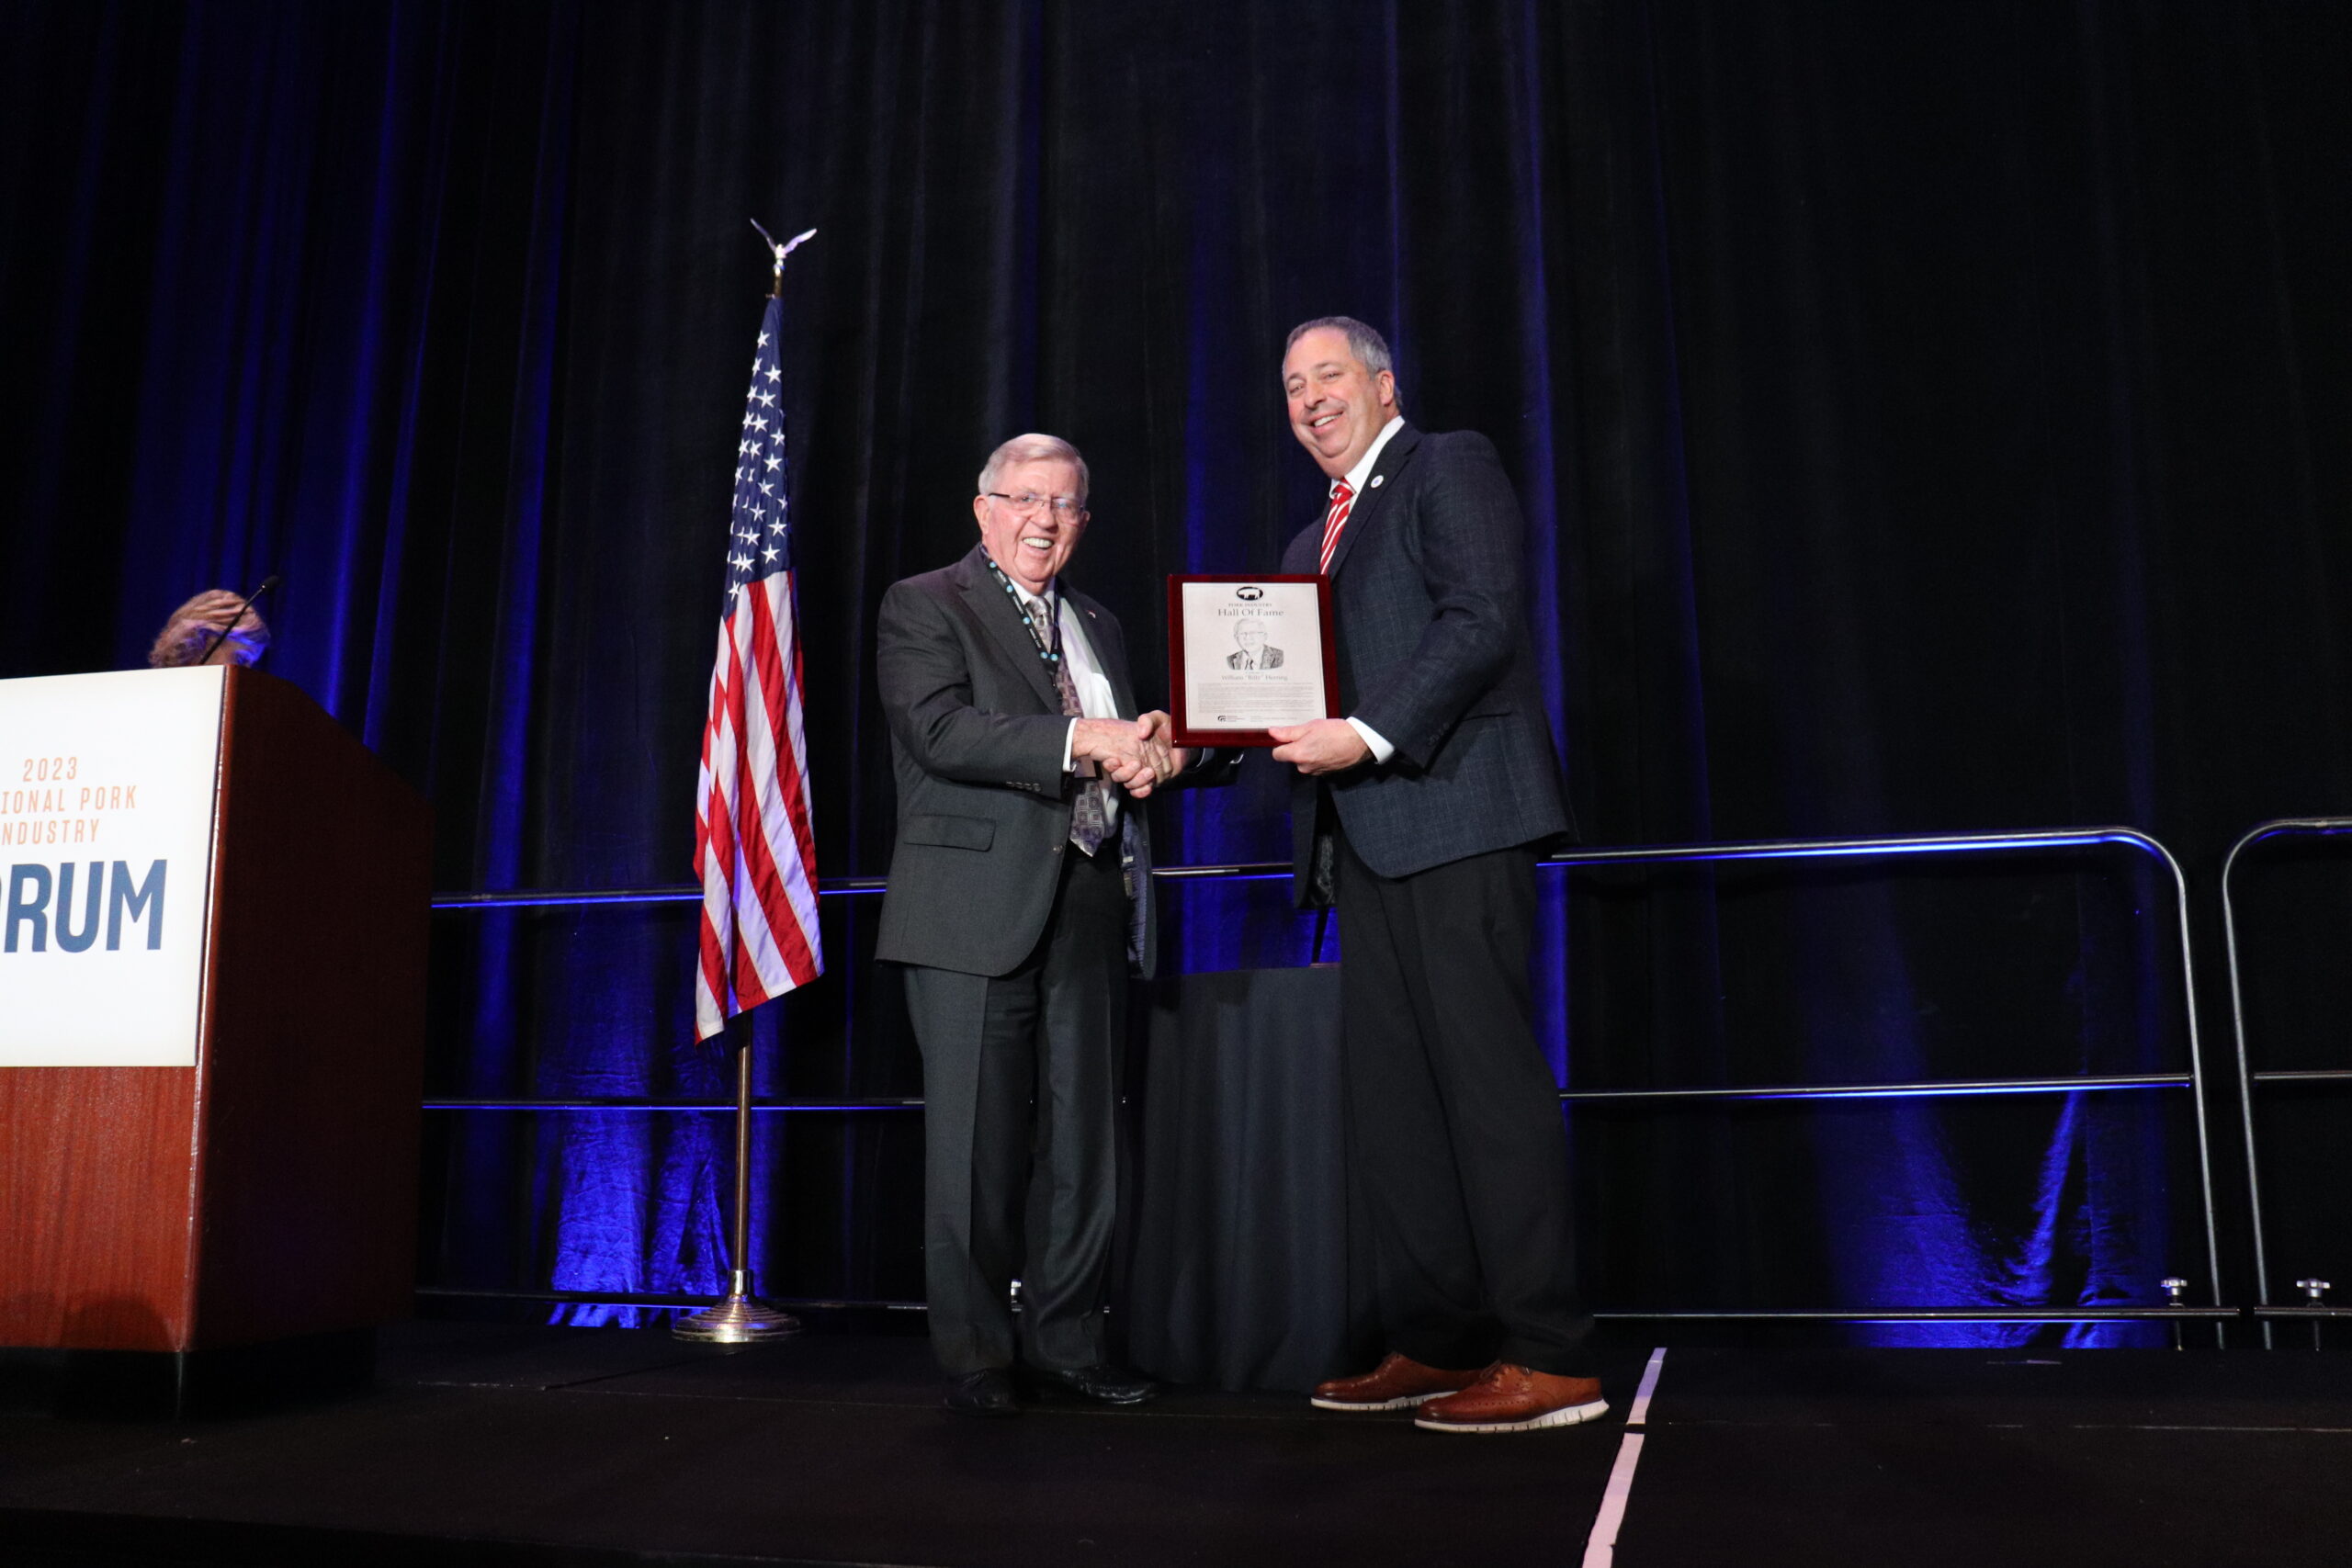 William Billy Herring inducted into National Pork Industry Hall of Fame